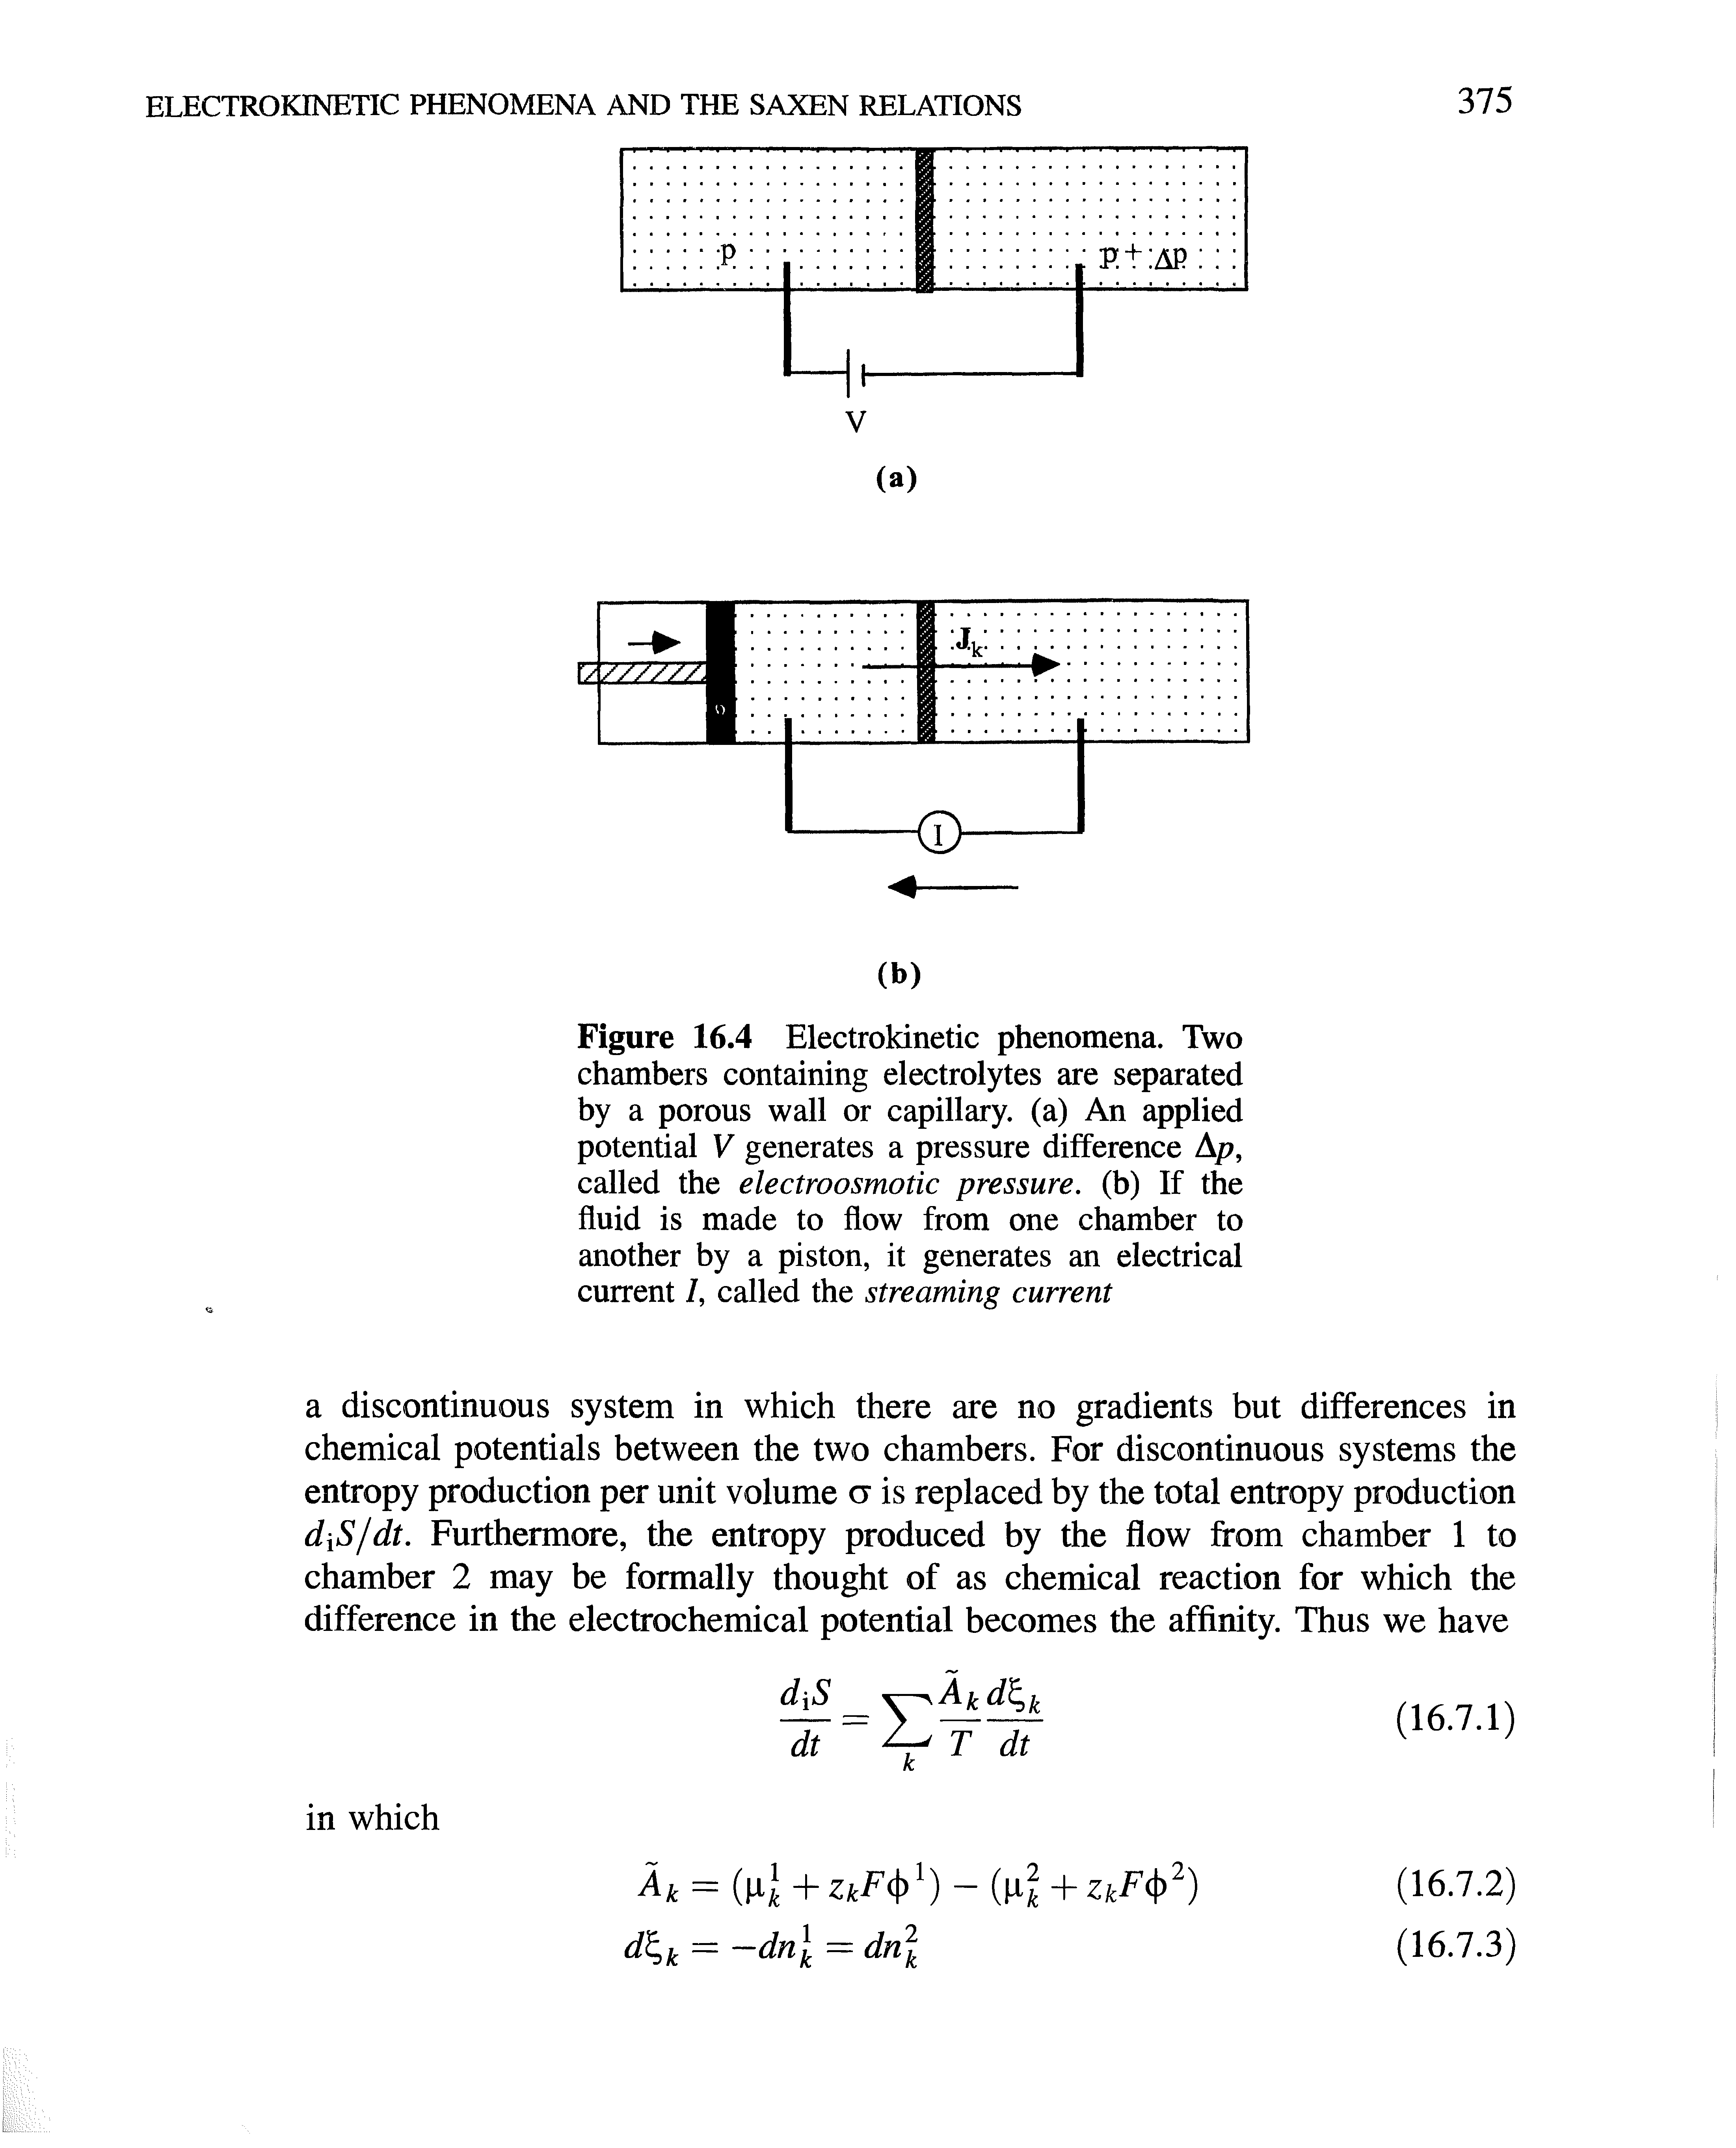 Figure 16.4 Electrokinetic phenomena. Two chambers containing electrolytes are separated by a porous wall or capillary, (a) An applied potential V generates a pressure difference Ap, called the electroosmotic pressure, (b) If the fluid is made to flow from one chamber to another by a piston, it generates an electrical current I, called the streaming current...